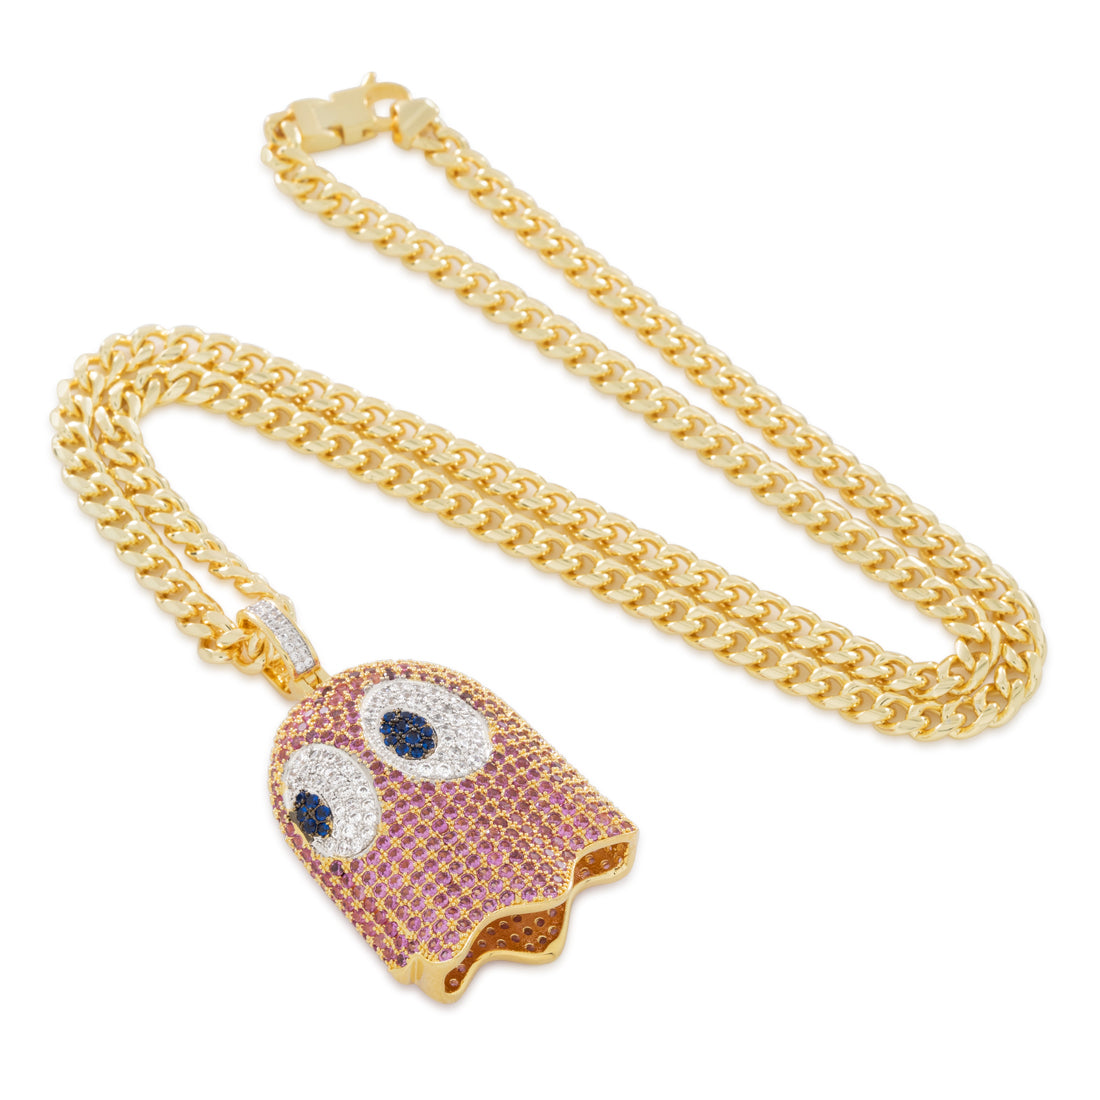 2.1" / 14K Gold PAC-MAN x King Ice - 3D Pinky Necklace